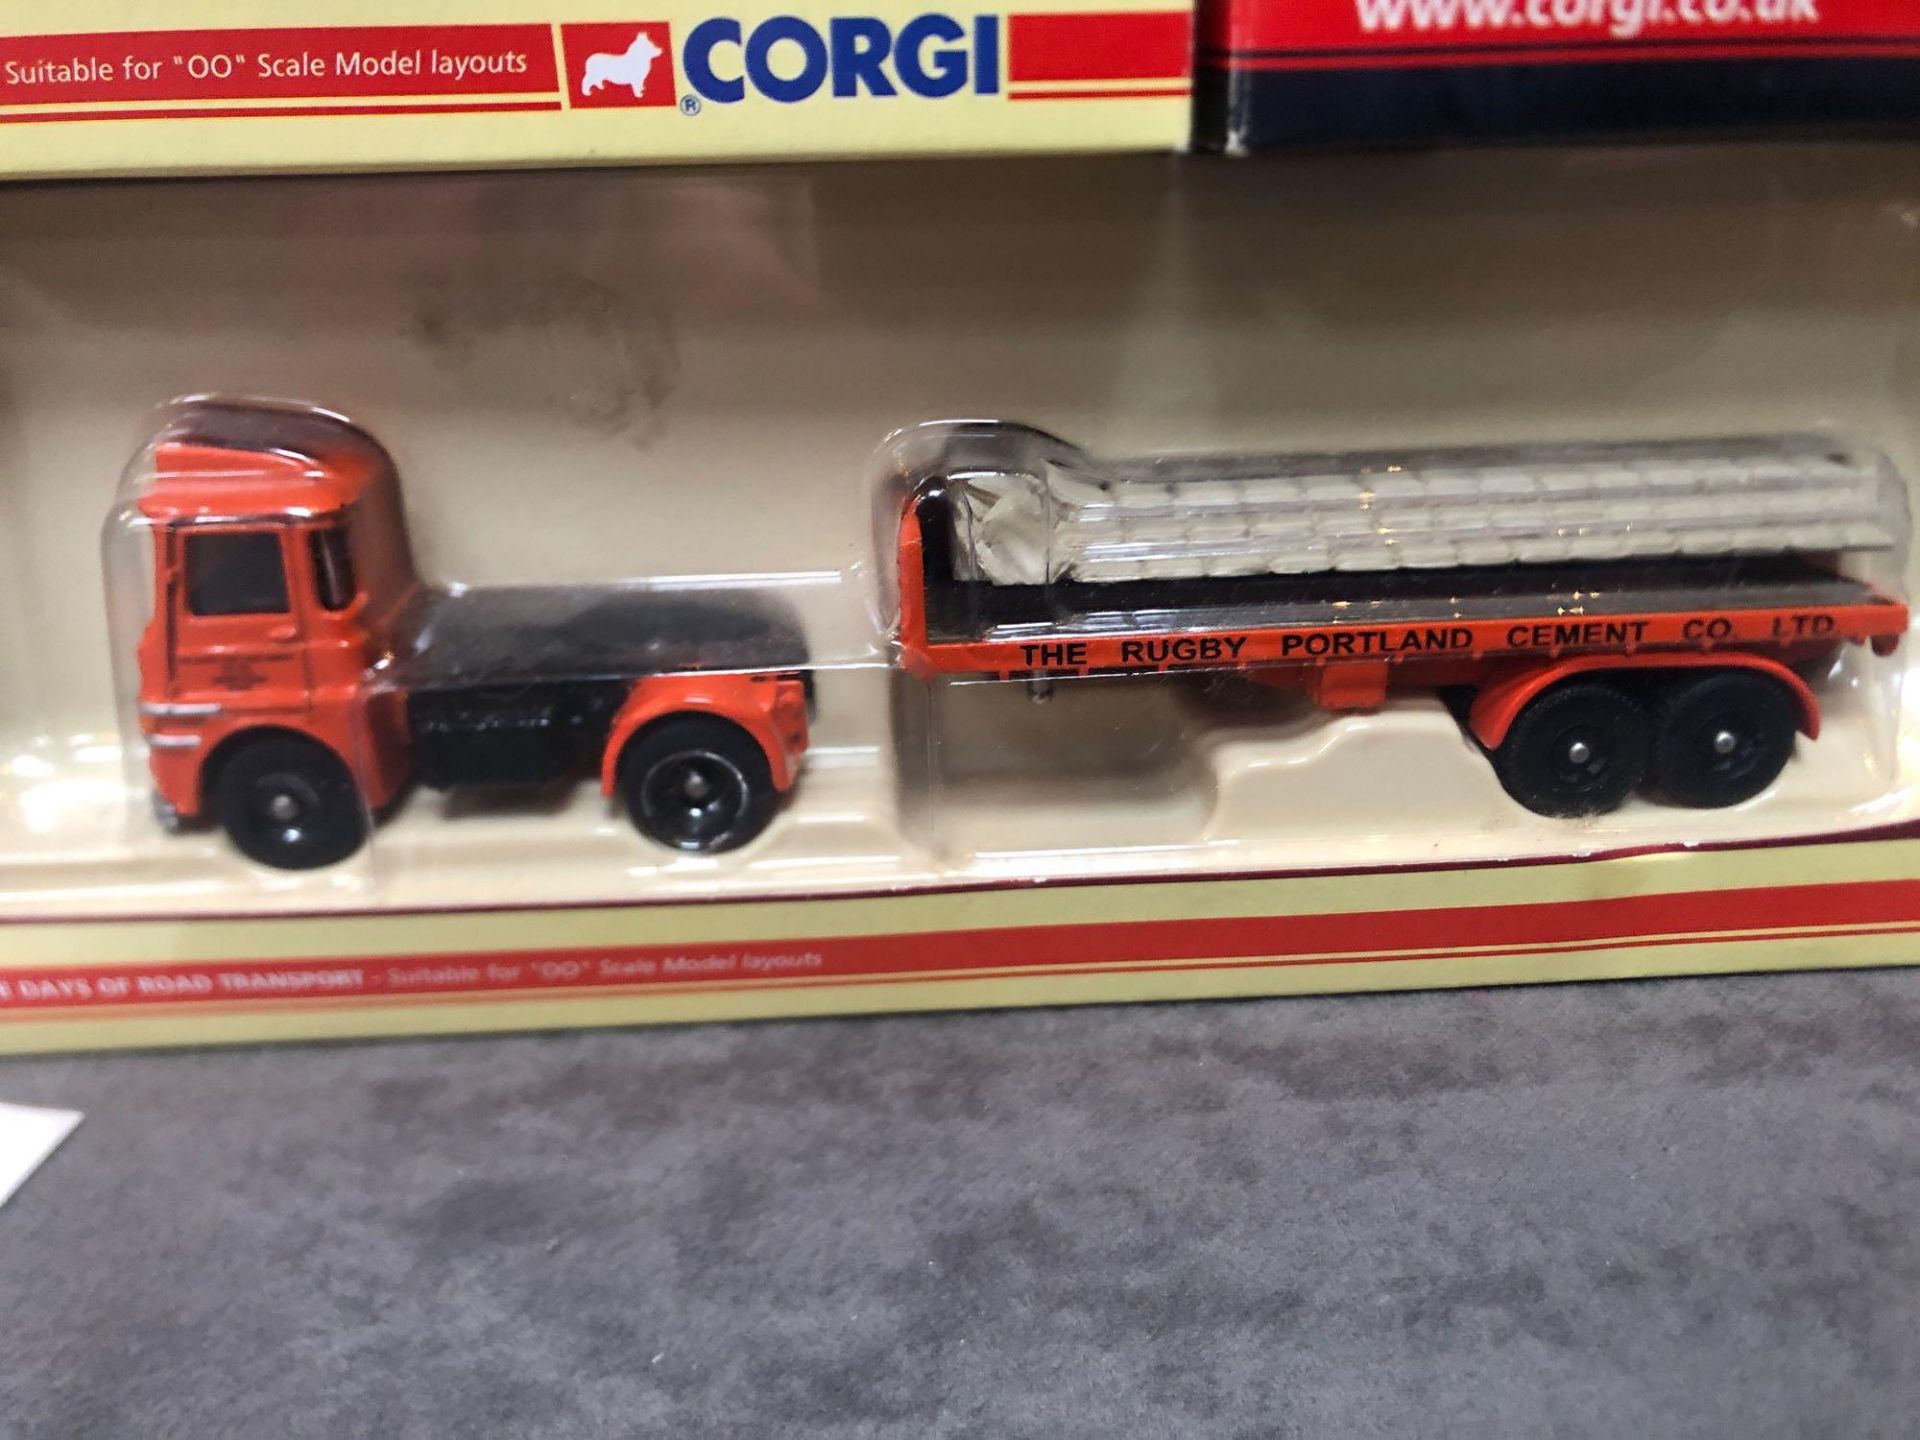 3x Diecast Vehicles Advertising Cement In Boxes - Image 2 of 4